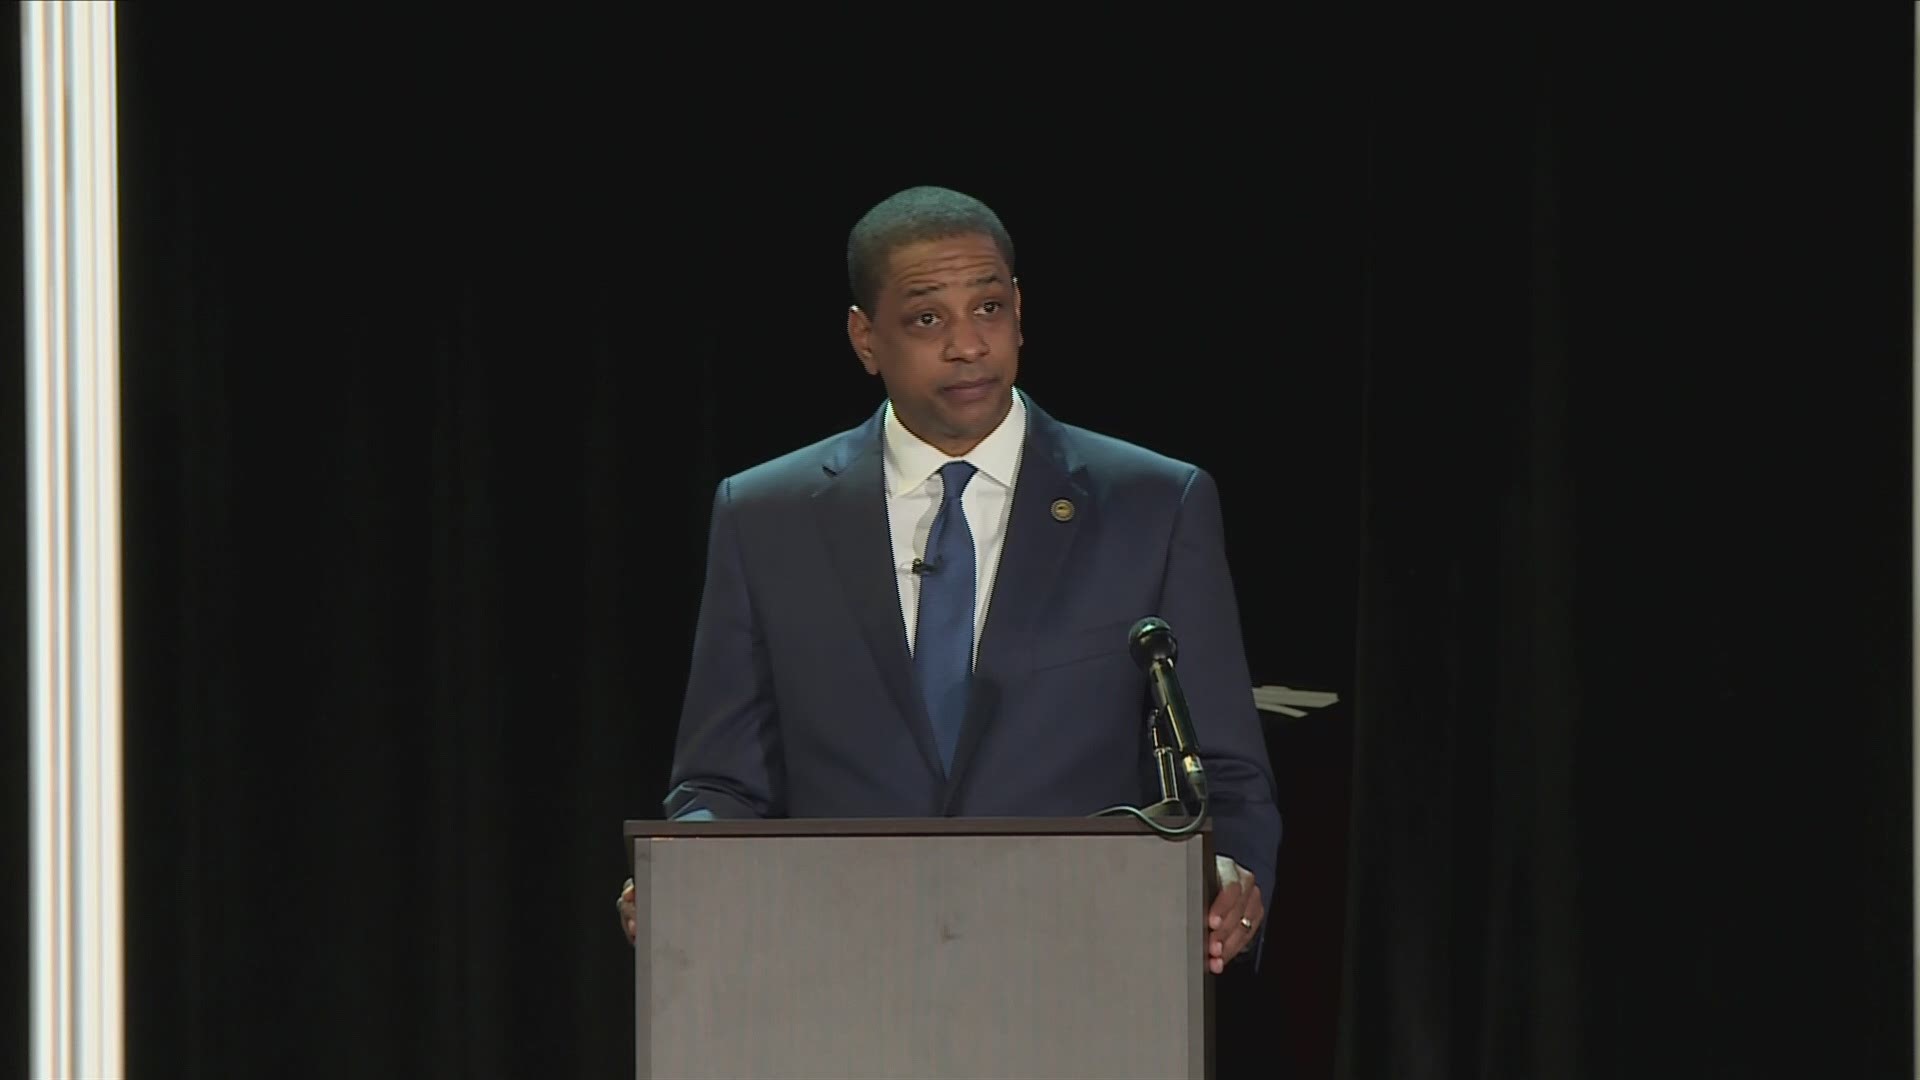 Virginia Lt. Gov. Justin Fairfax who was accused of sexual assault in 2019 claims that he was denied due process, likening his experience to that of Floyd and Till.